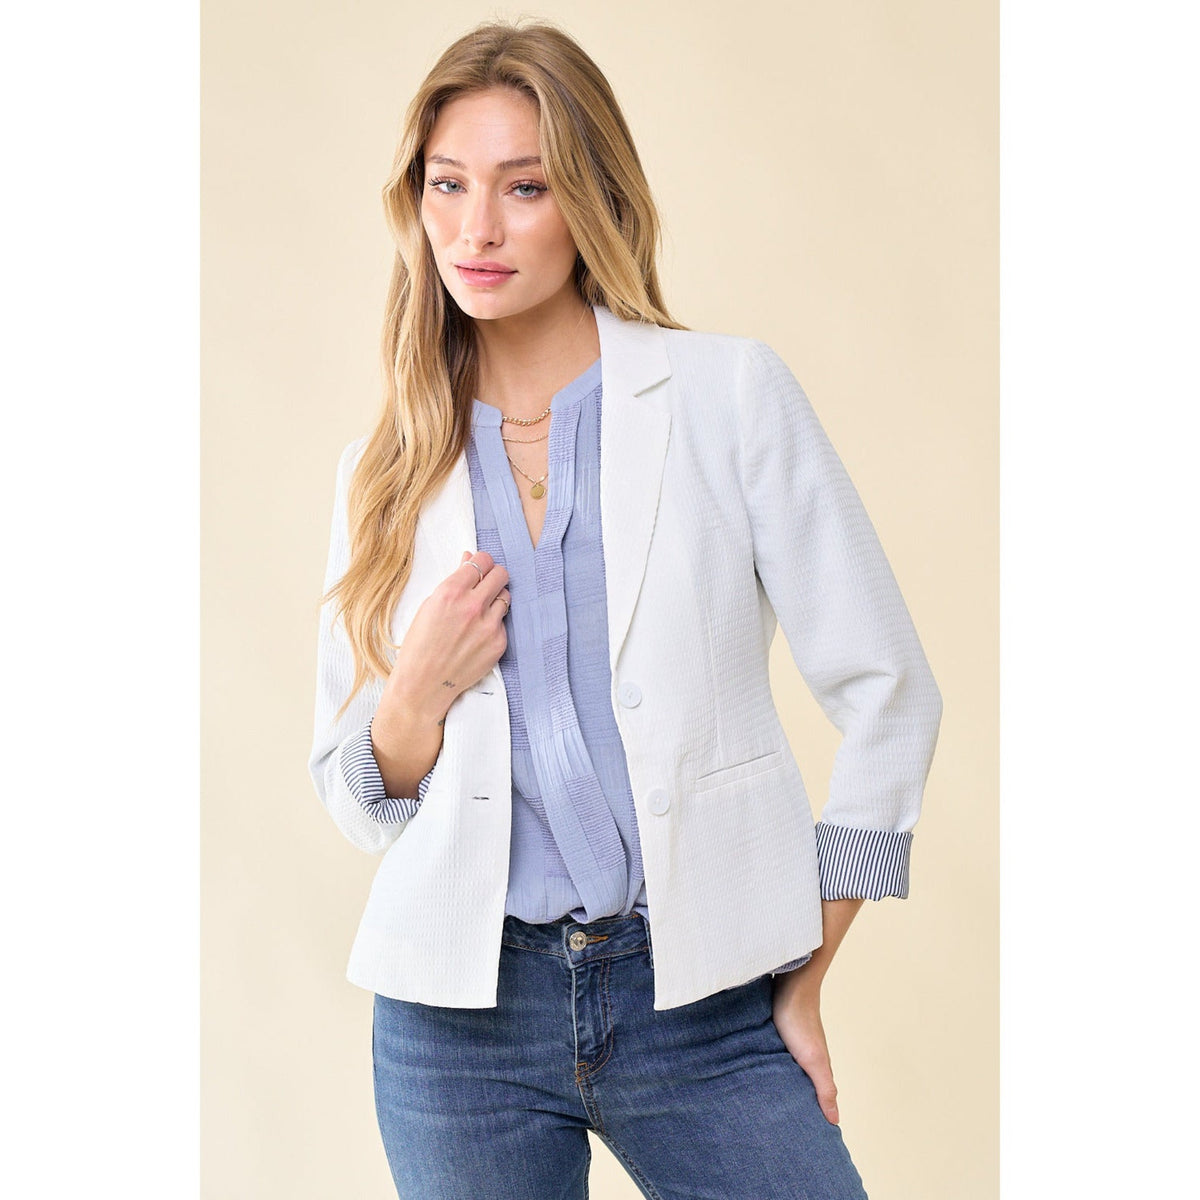 White textured blazer with navy and white stripped cuffs - Women's clothing 